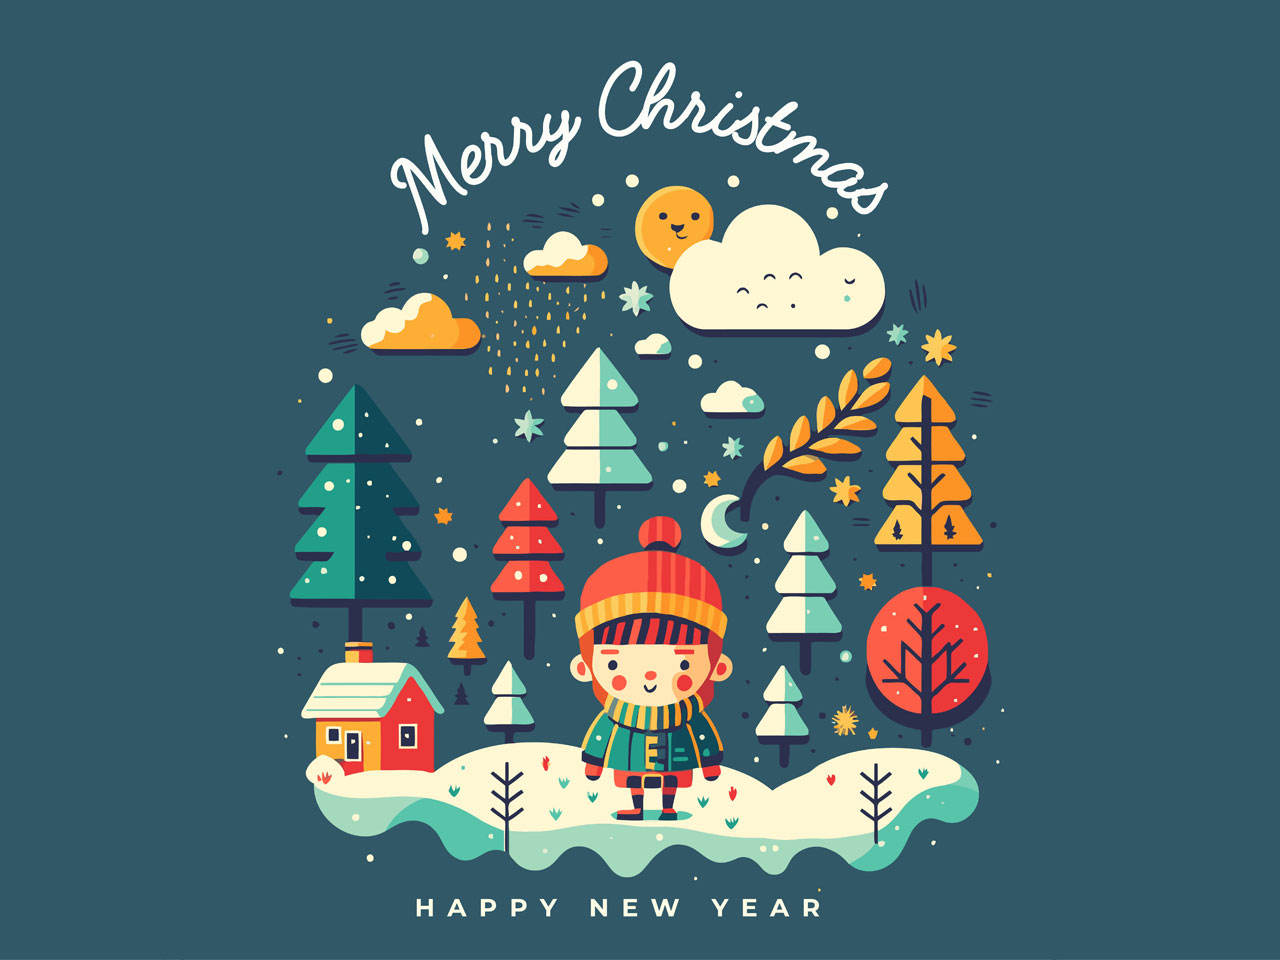 Merry christmas happy new year greetings card invitation banner